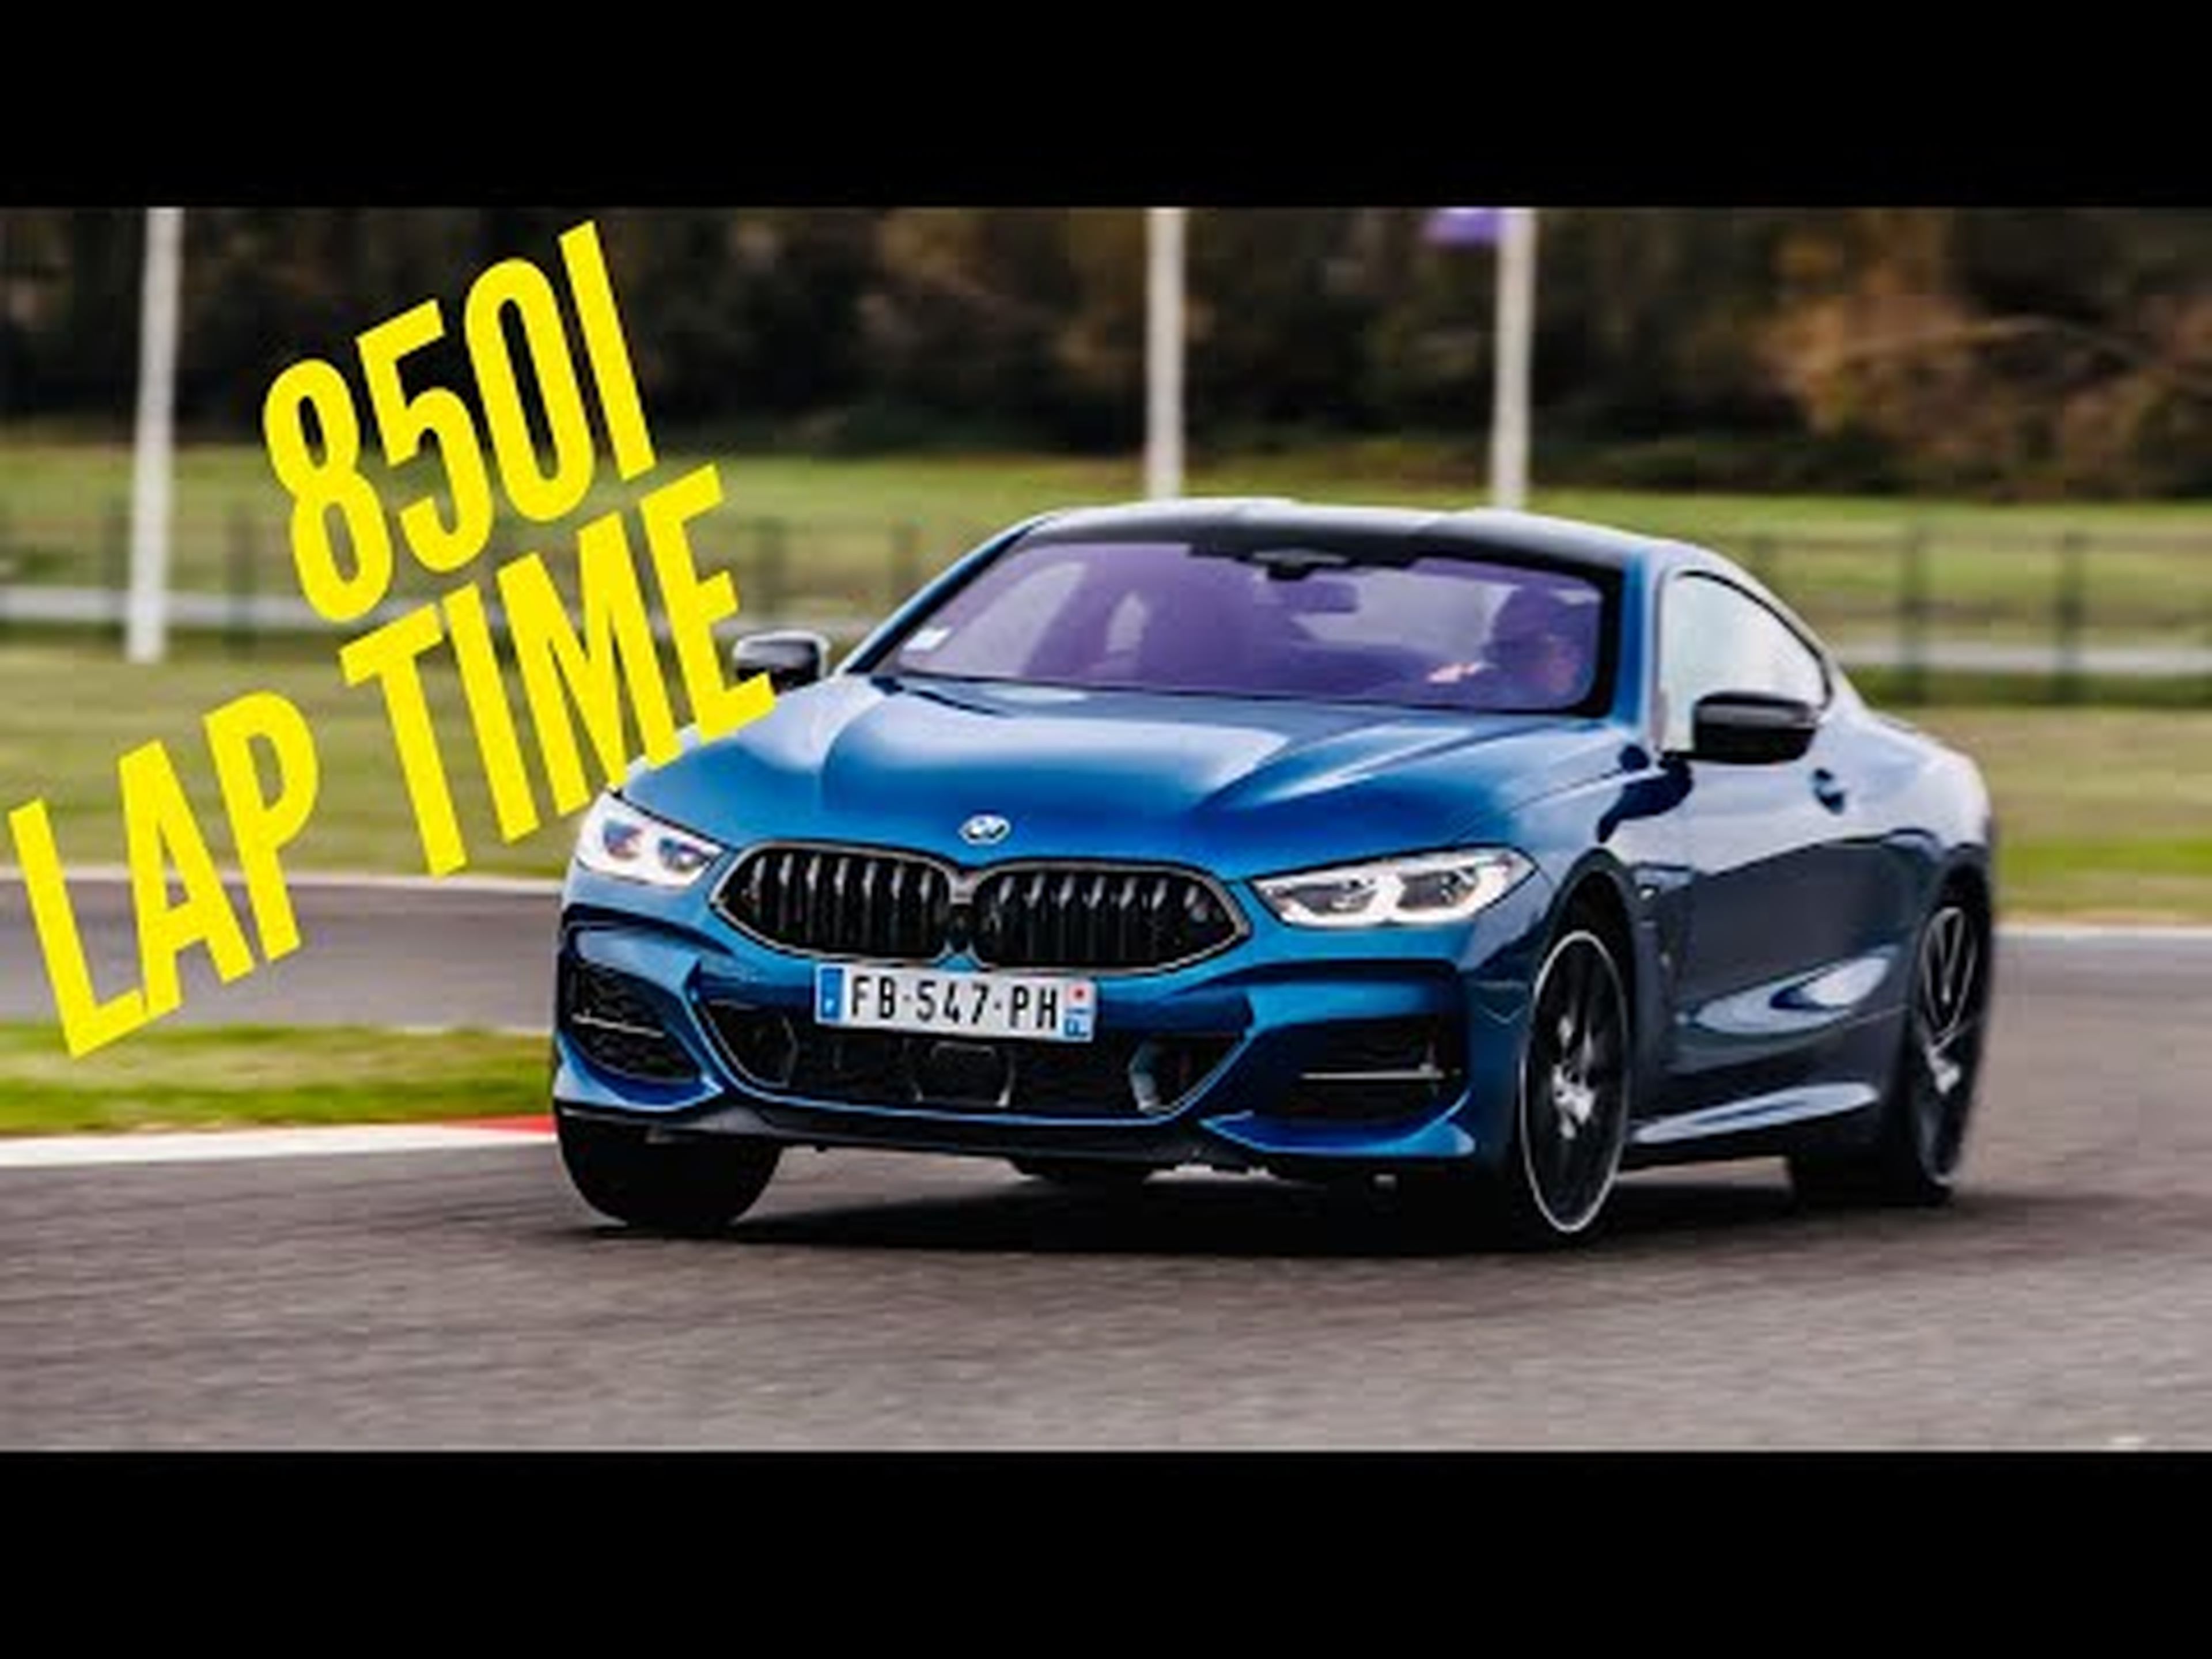 BMW 850i xDrive : Magny-Cours Lap time